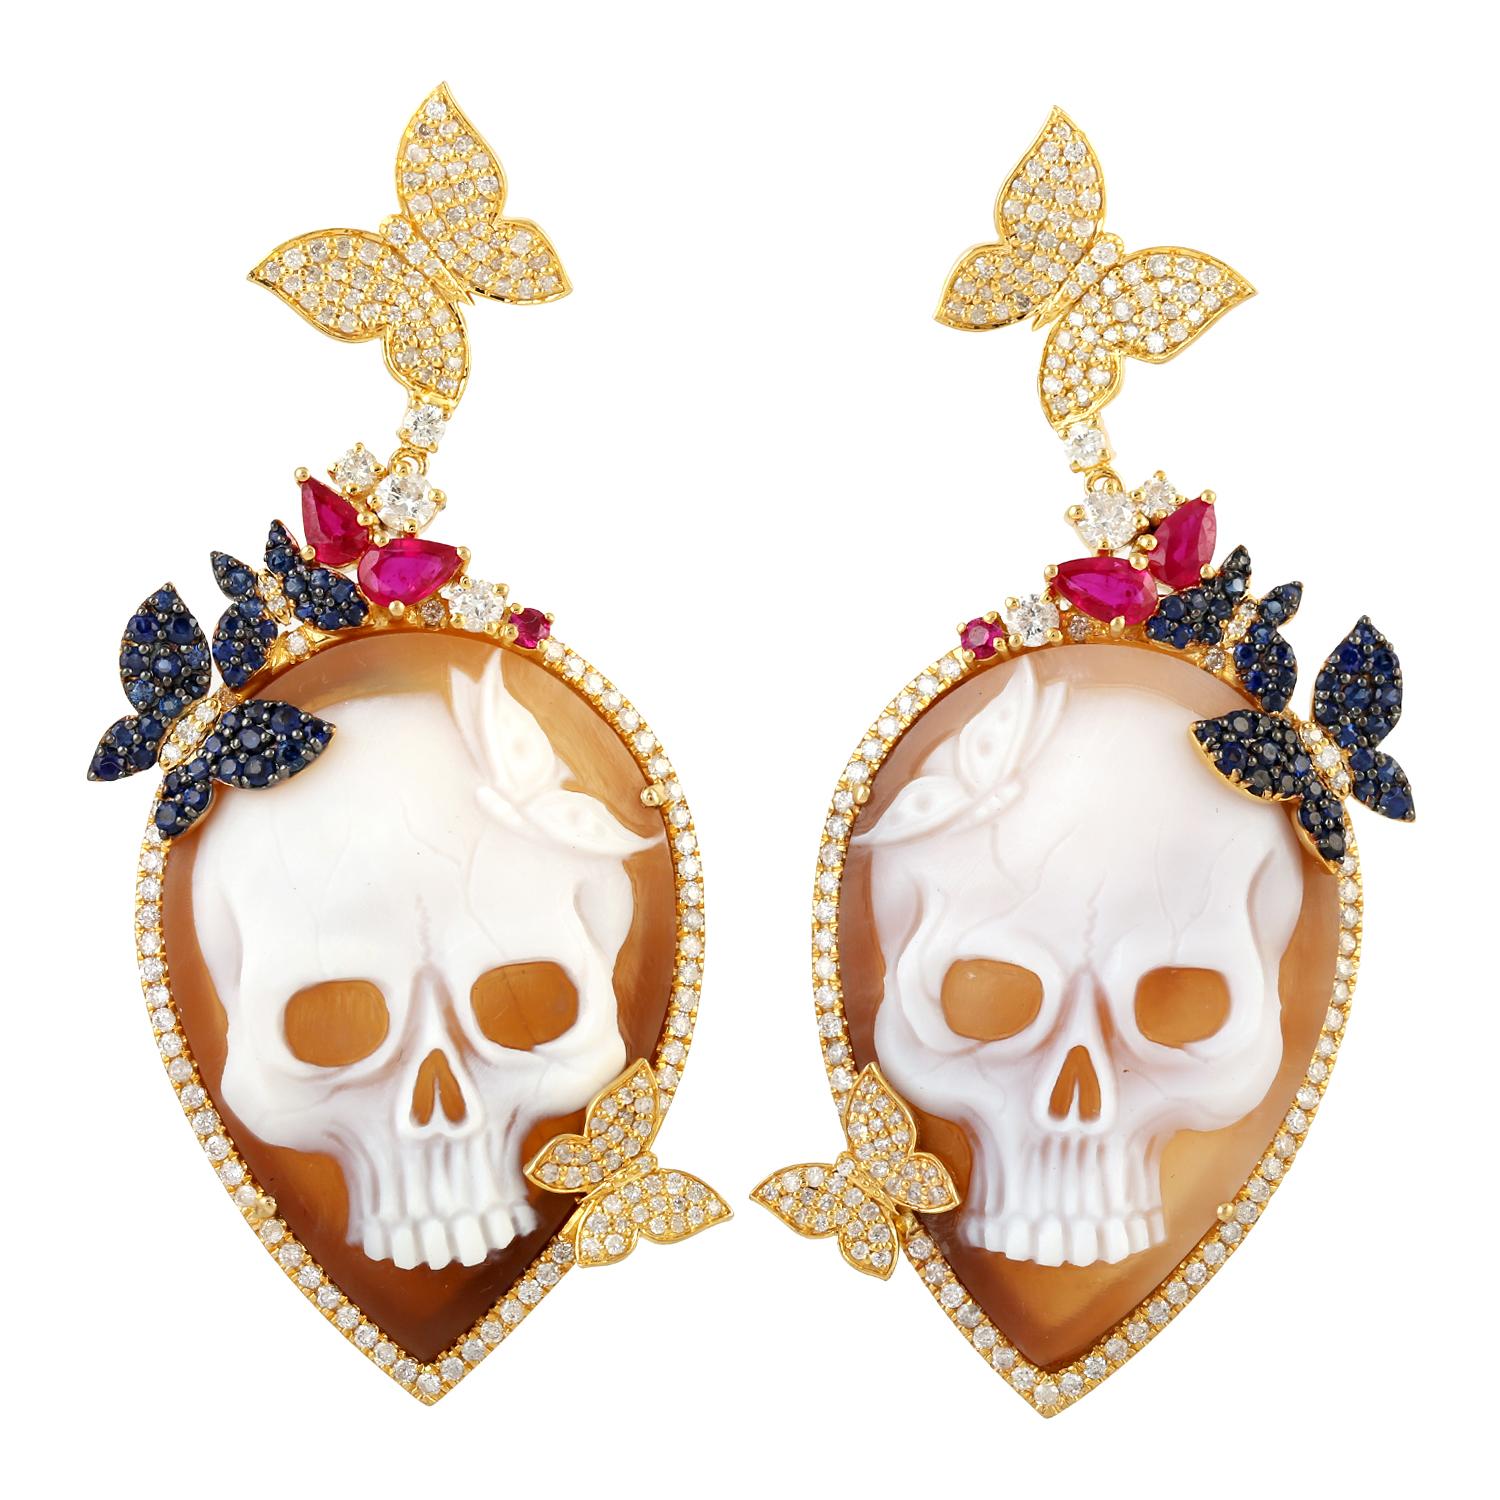 Cast in 18 karat gold. These beautiful cameo skull earrings are set Ruby, Sapphire and 2.18 carats of sparkling diamonds. 

FOLLOW  MEGHNA JEWELS storefront to view the latest collection & exclusive pieces.  Meghna Jewels is proudly rated as a Top